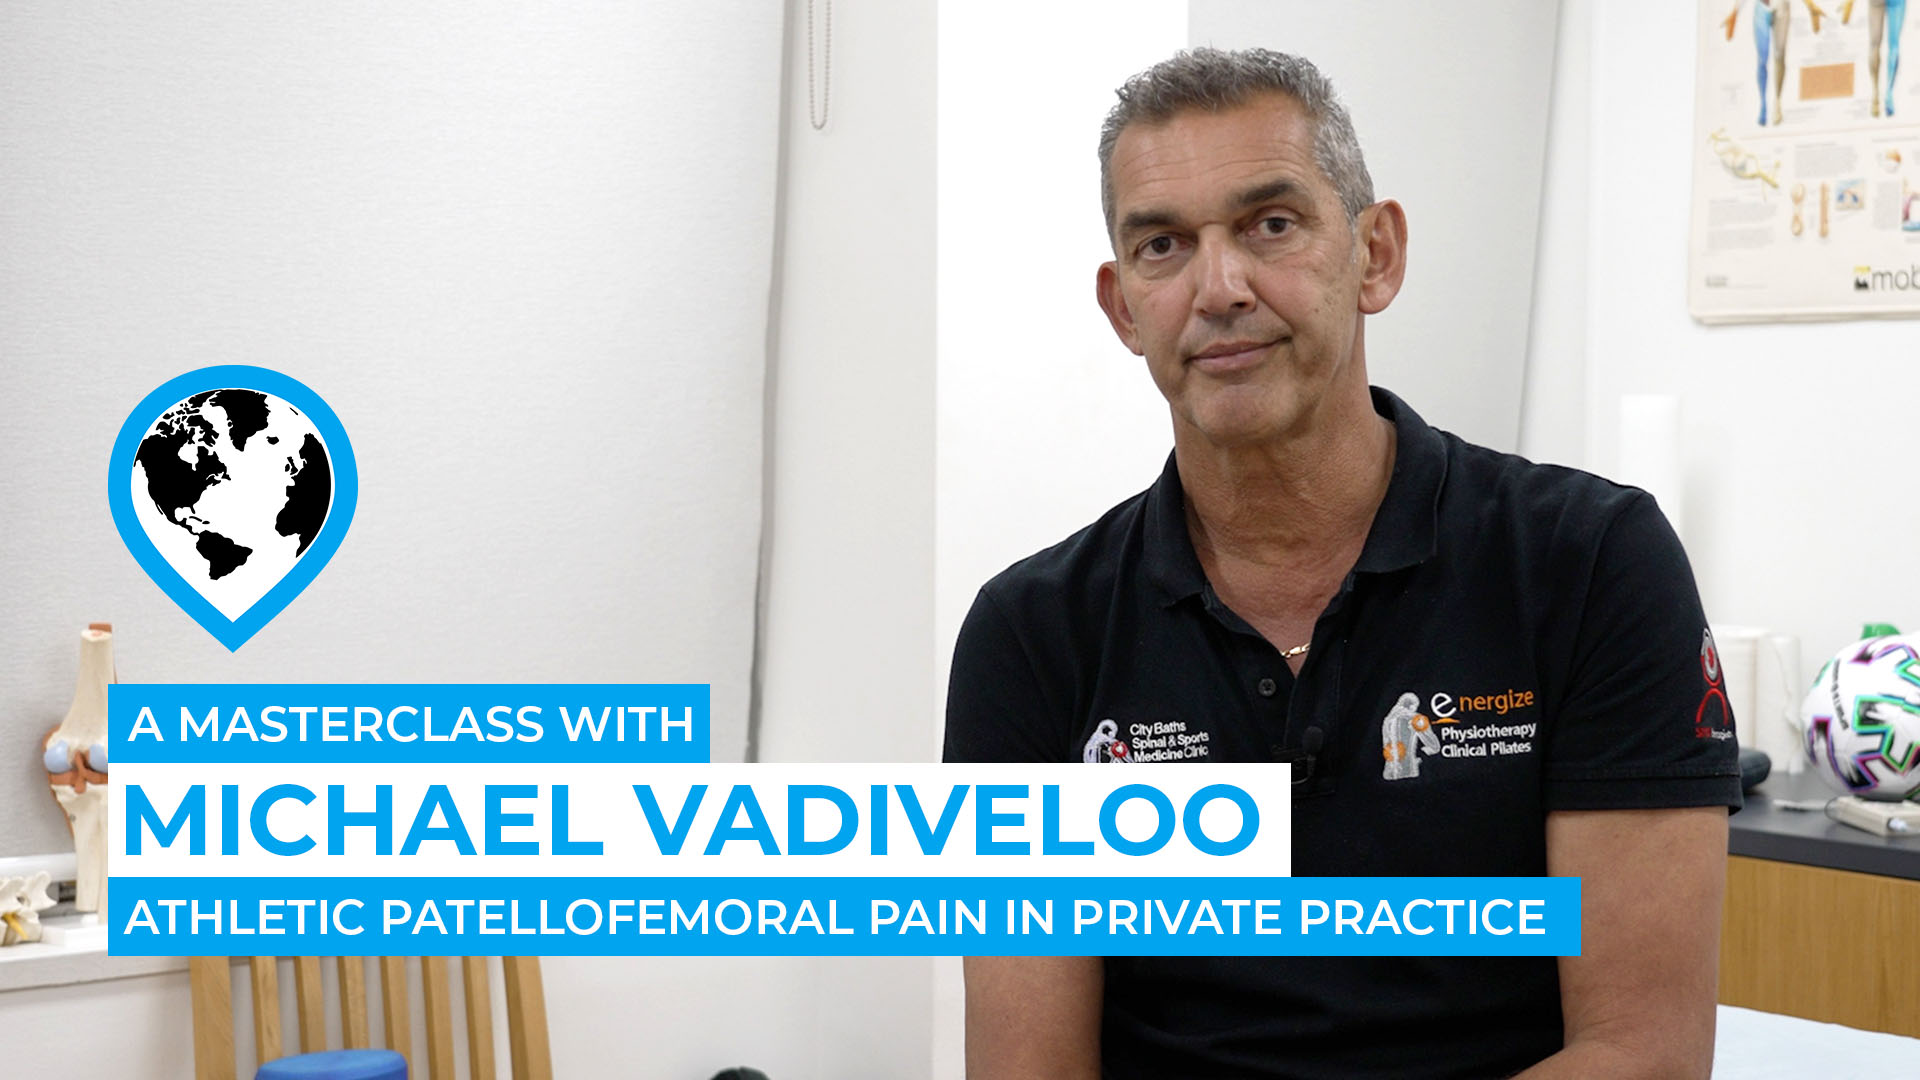 Michael Vadiveloo - Athletic patellofemoral pain in private